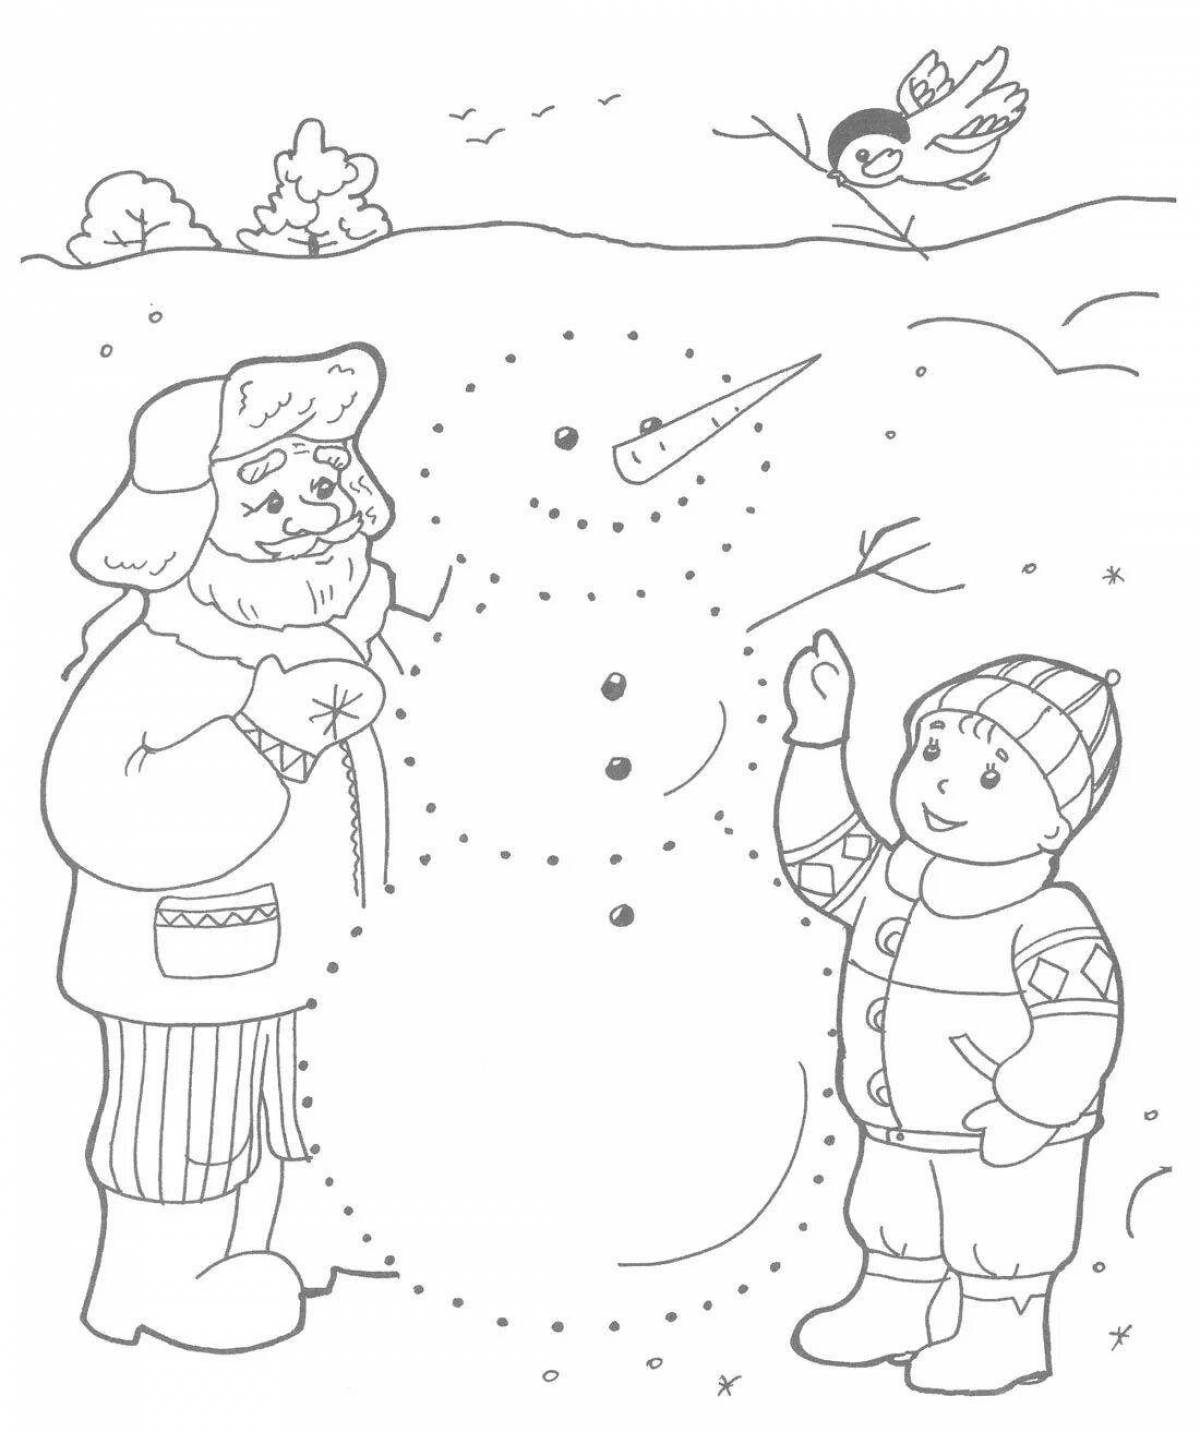 A fun winter coloring book for 4-5 year olds